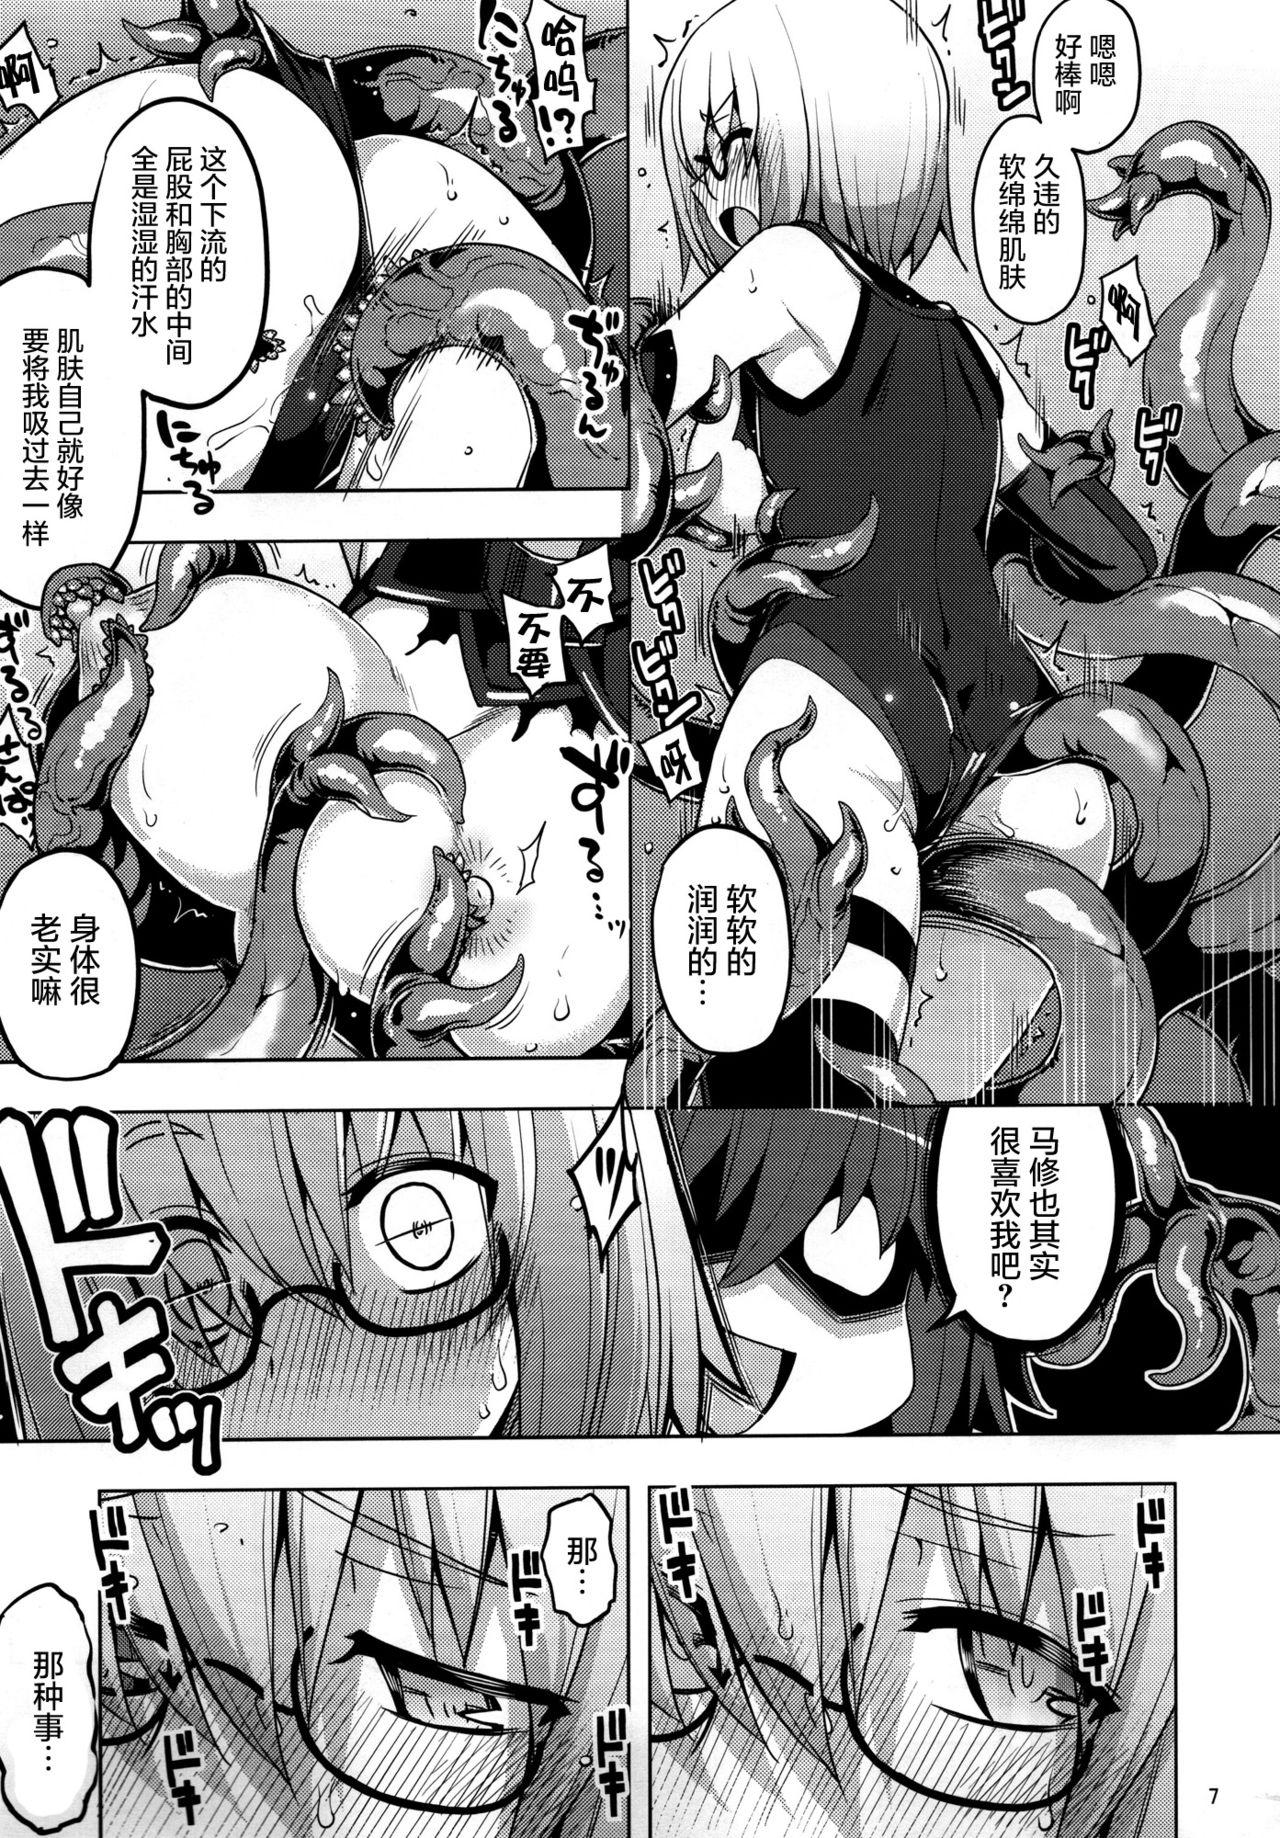 Large RE25 - Fate grand order Unshaved - Page 7